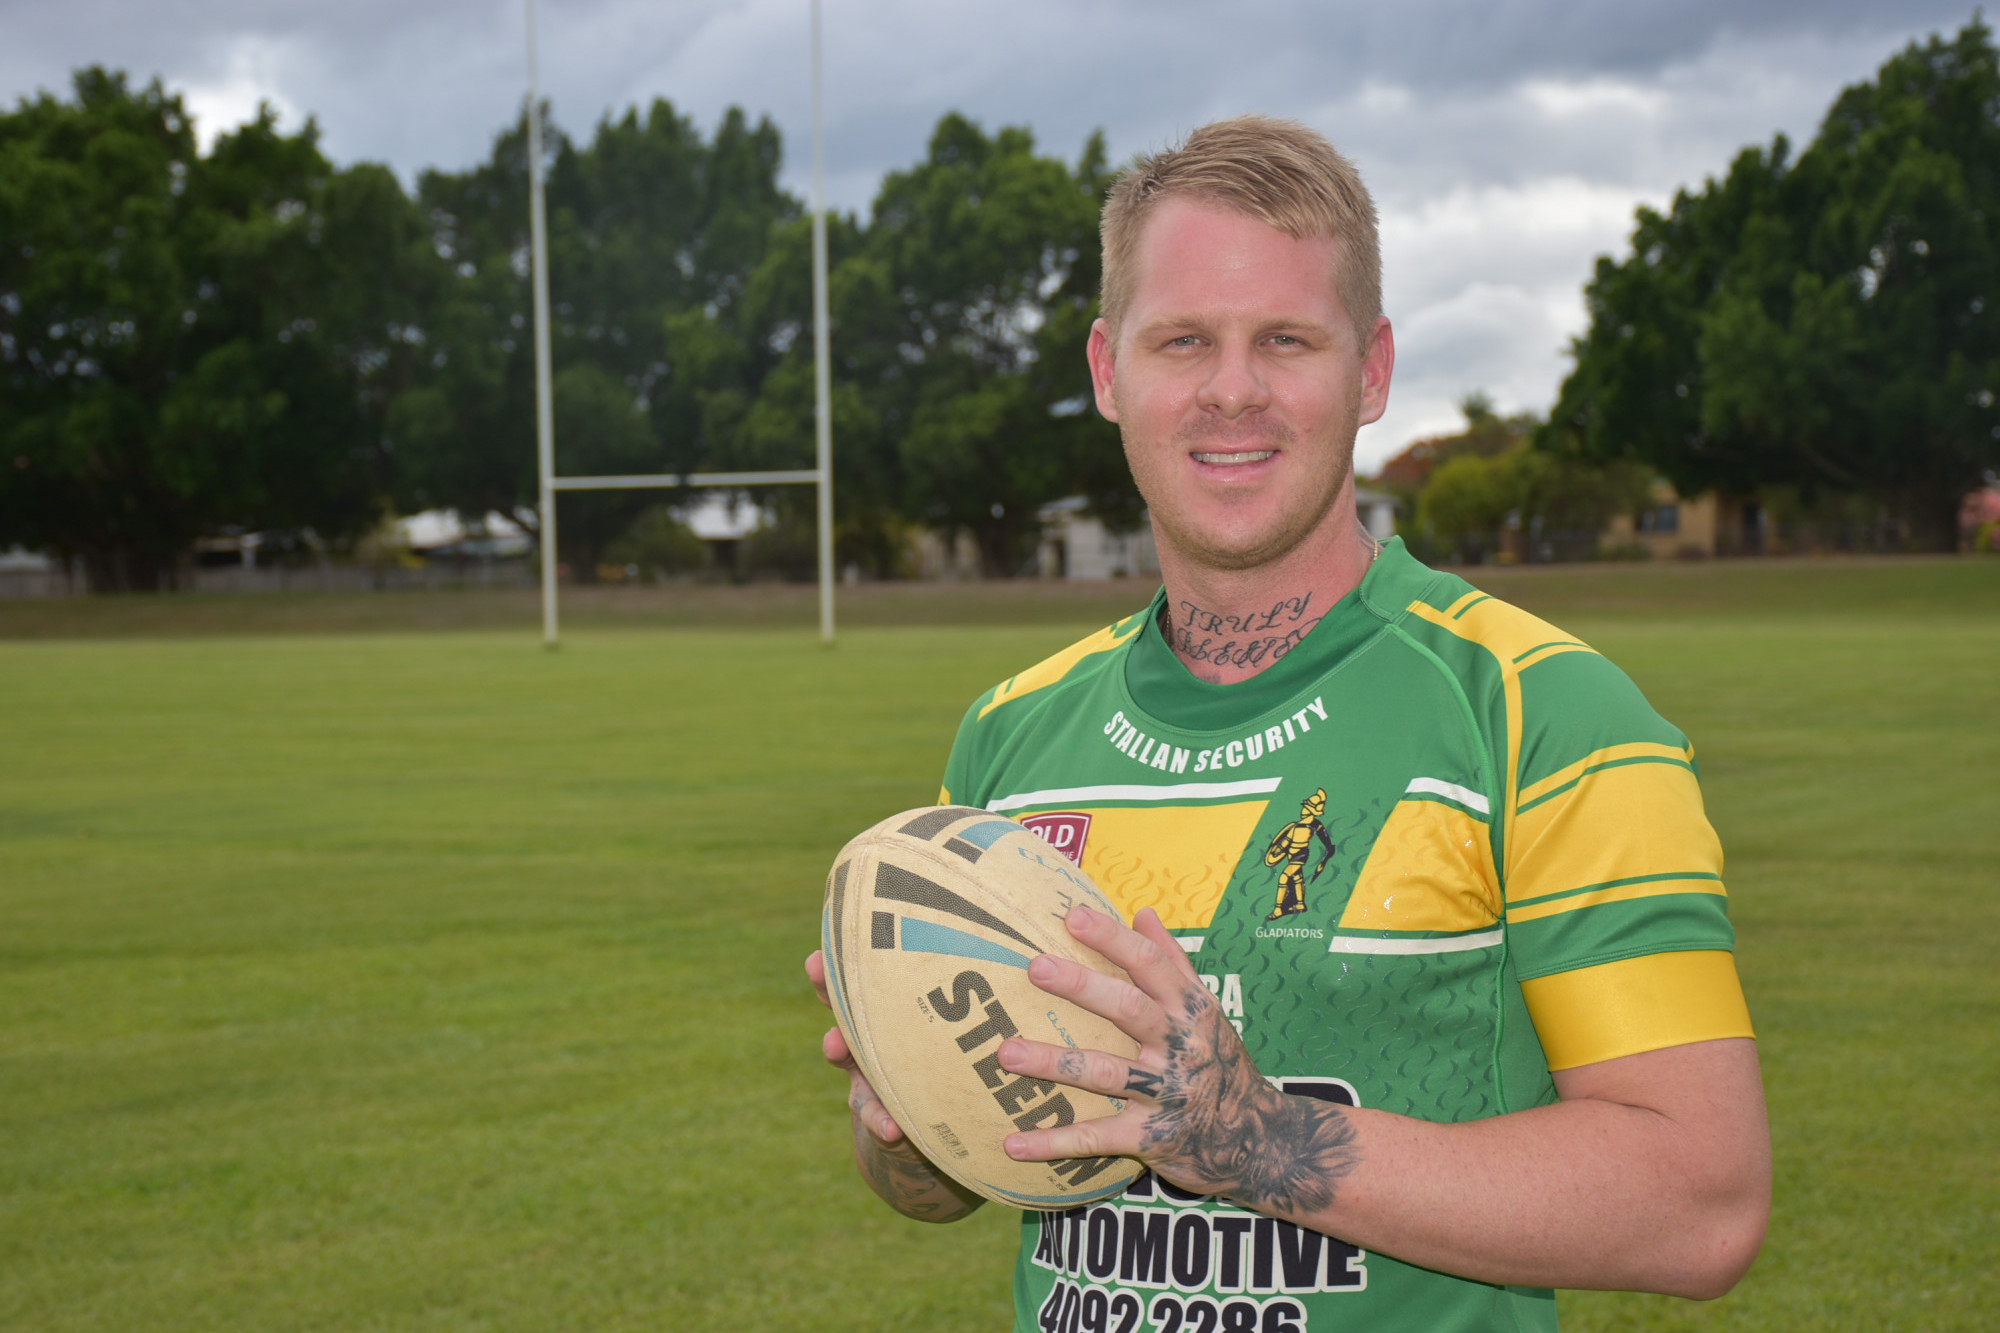 Mareeba Gladiators Captain Coach Trent Barnard is excited to lead his team into the 2021 Cairns District Rugby League season.